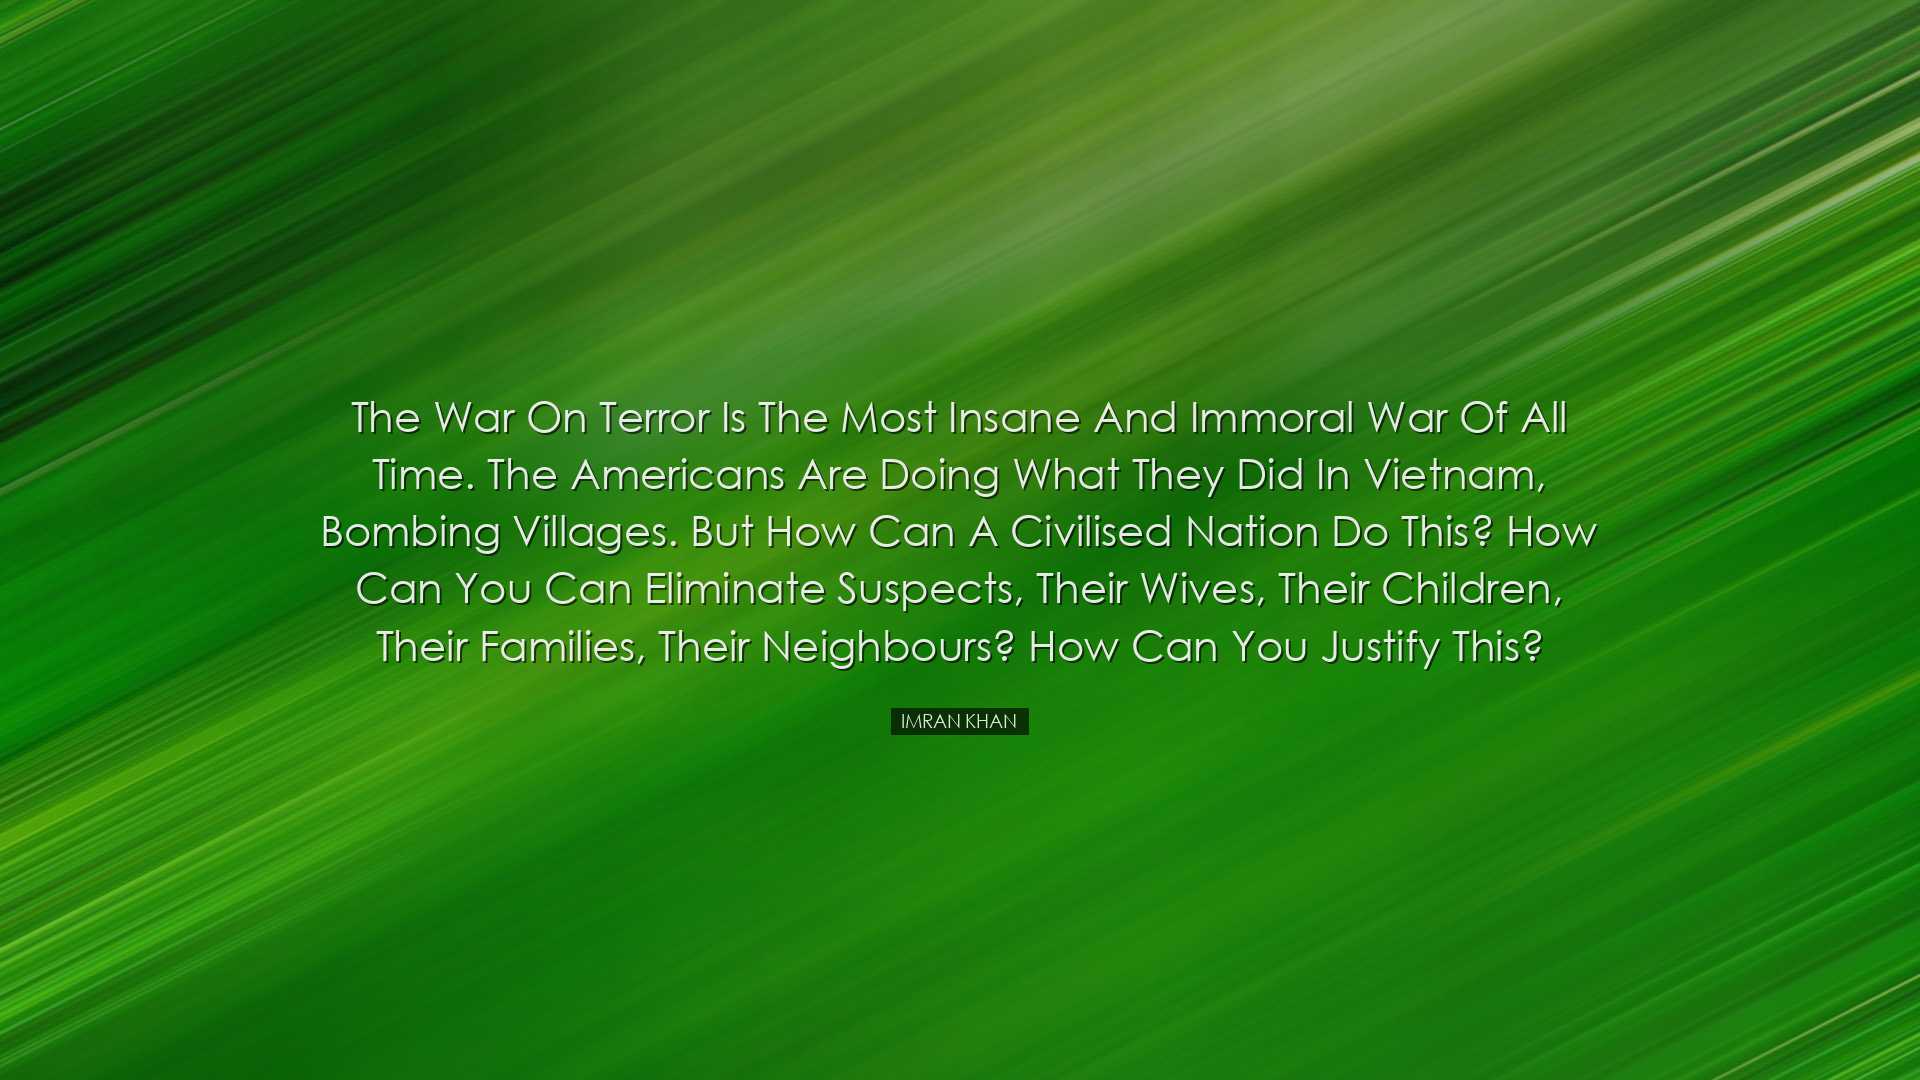 The war on terror is the most insane and immoral war of all time.